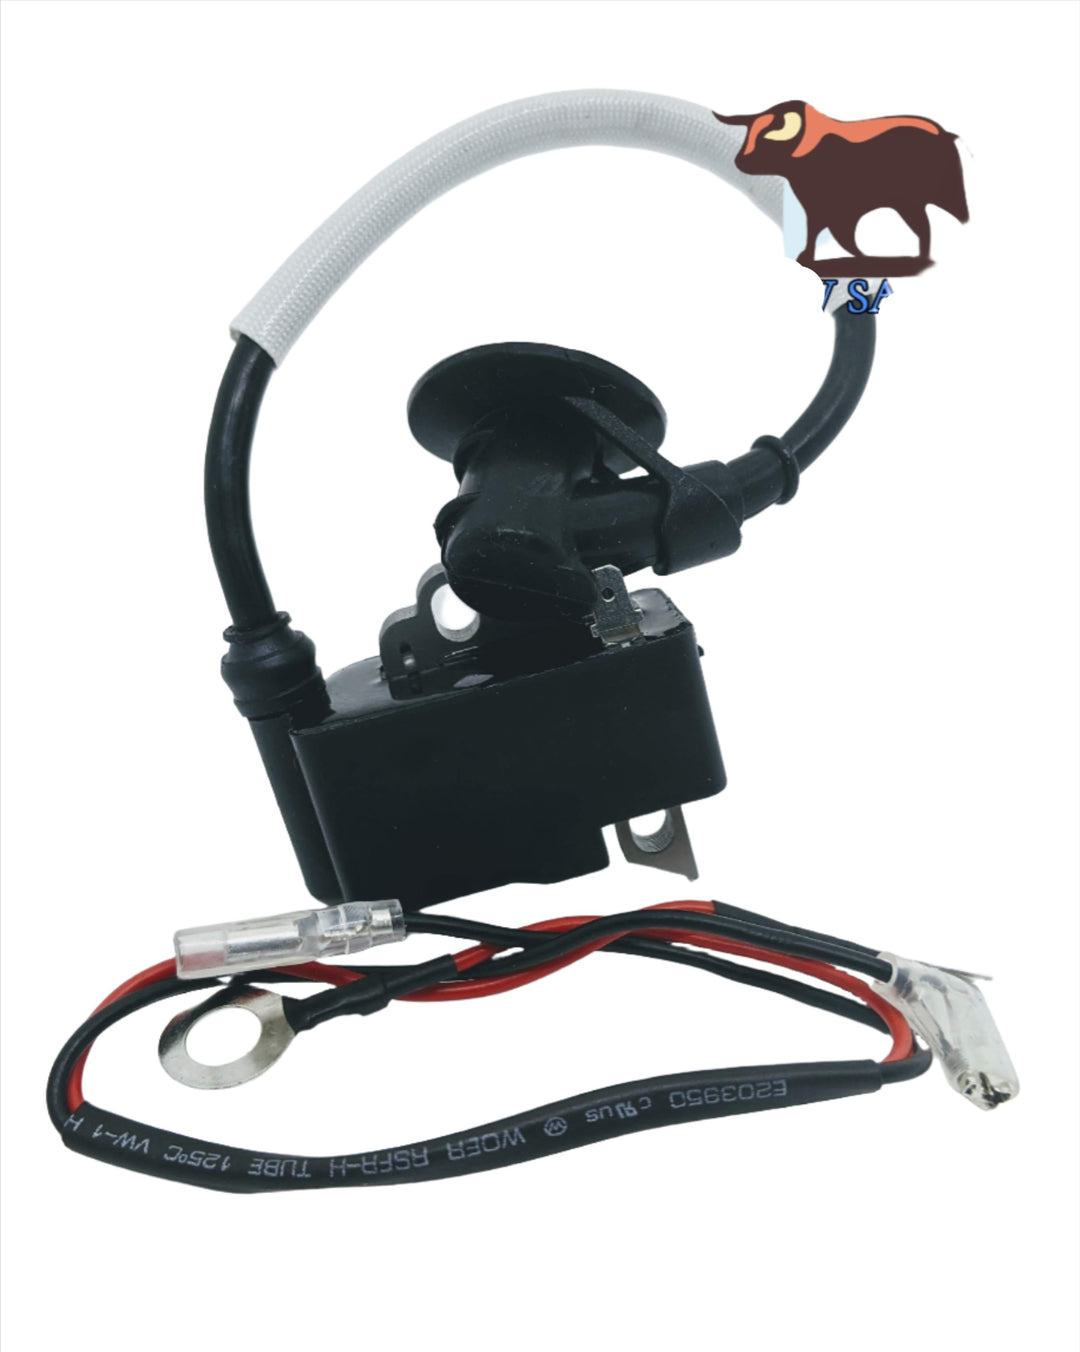 THE DUKE'S IGNITION COIL MODULE FITS STIHL MS362